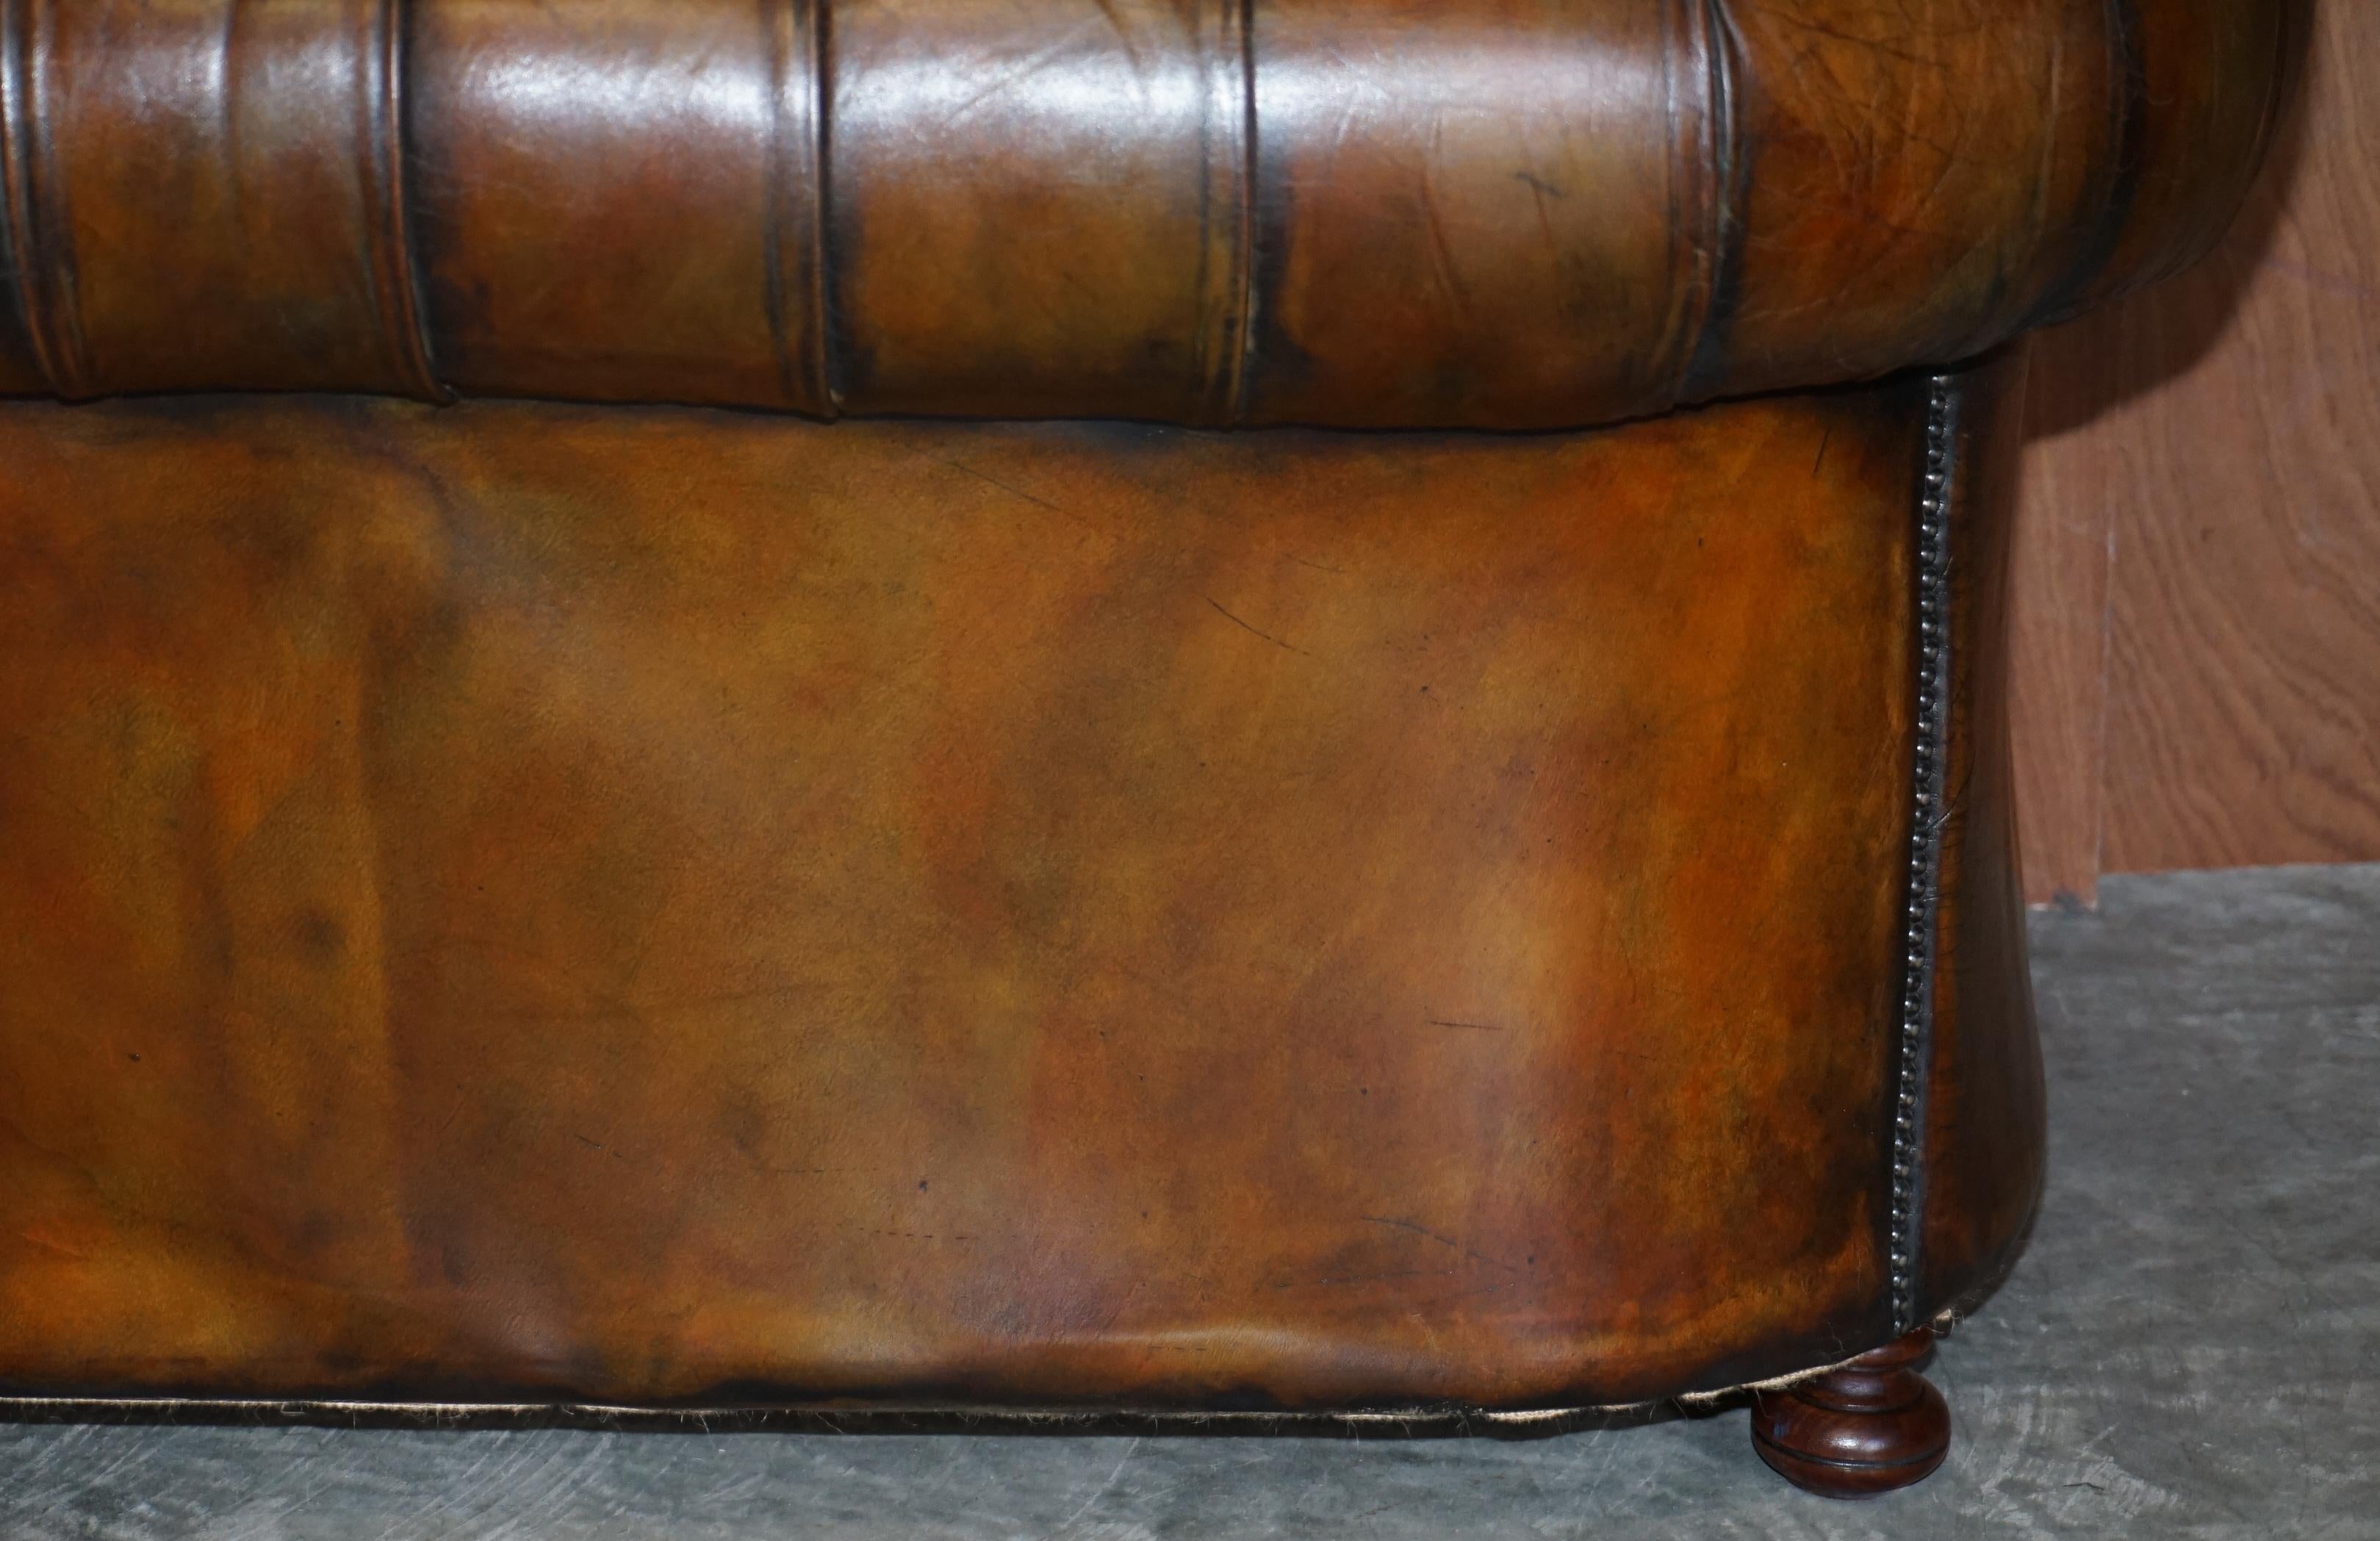 Stunning Antique Fully Restored Cigar Brown Leather Chesterfield Sofa Walnut For Sale 8